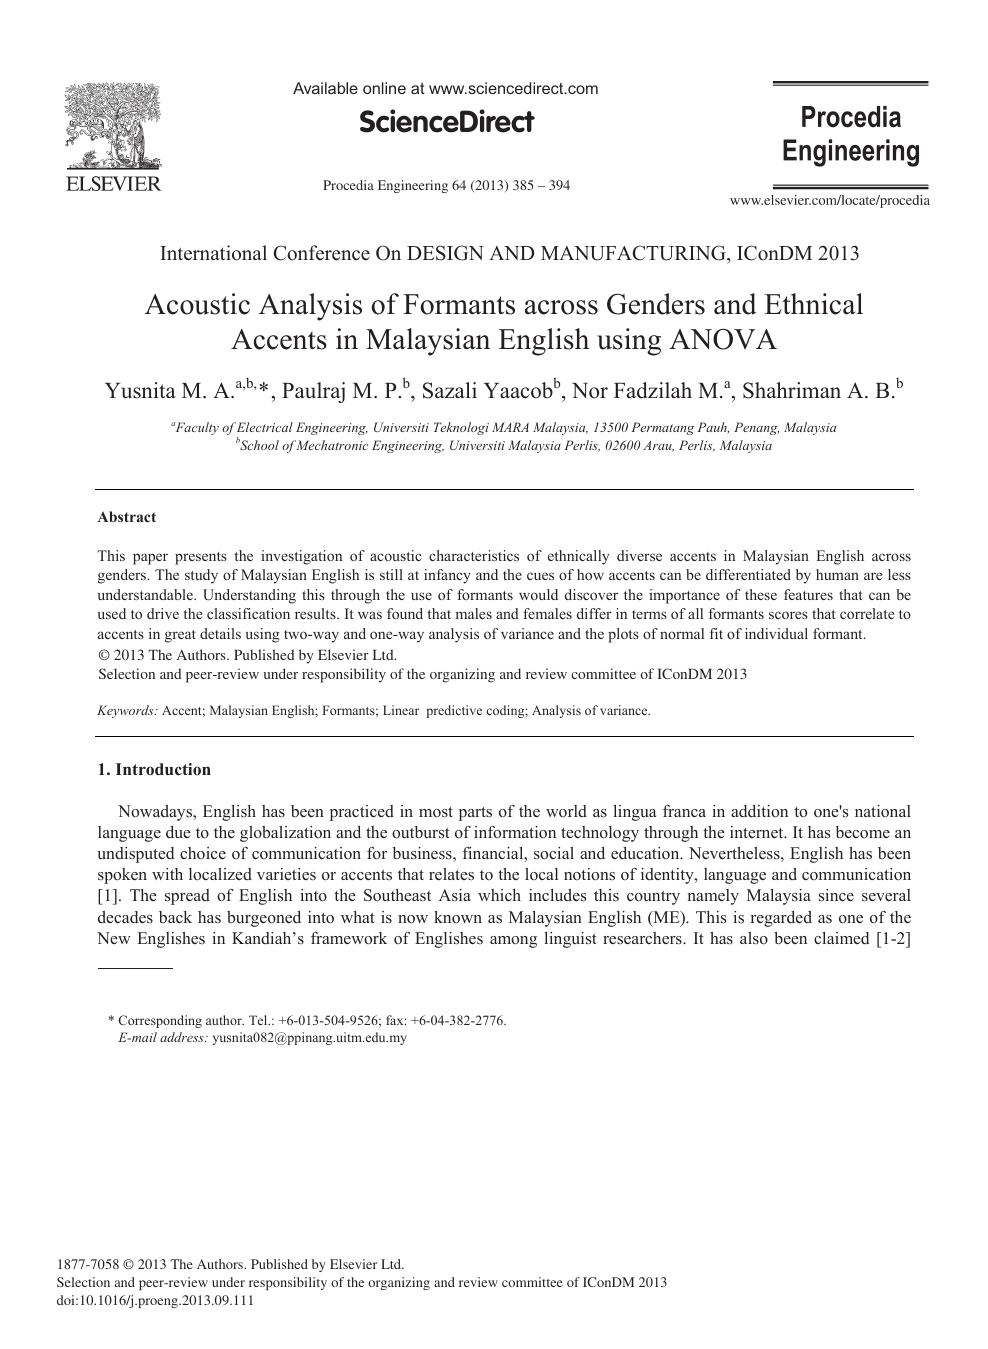 Acoustic Analysis Of Formants Across Genders And Ethnical Accents In Malaysian English Using Anova Topic Of Research Paper In Educational Sciences Download Scholarly Article Pdf And Read For Free On Cyberleninka